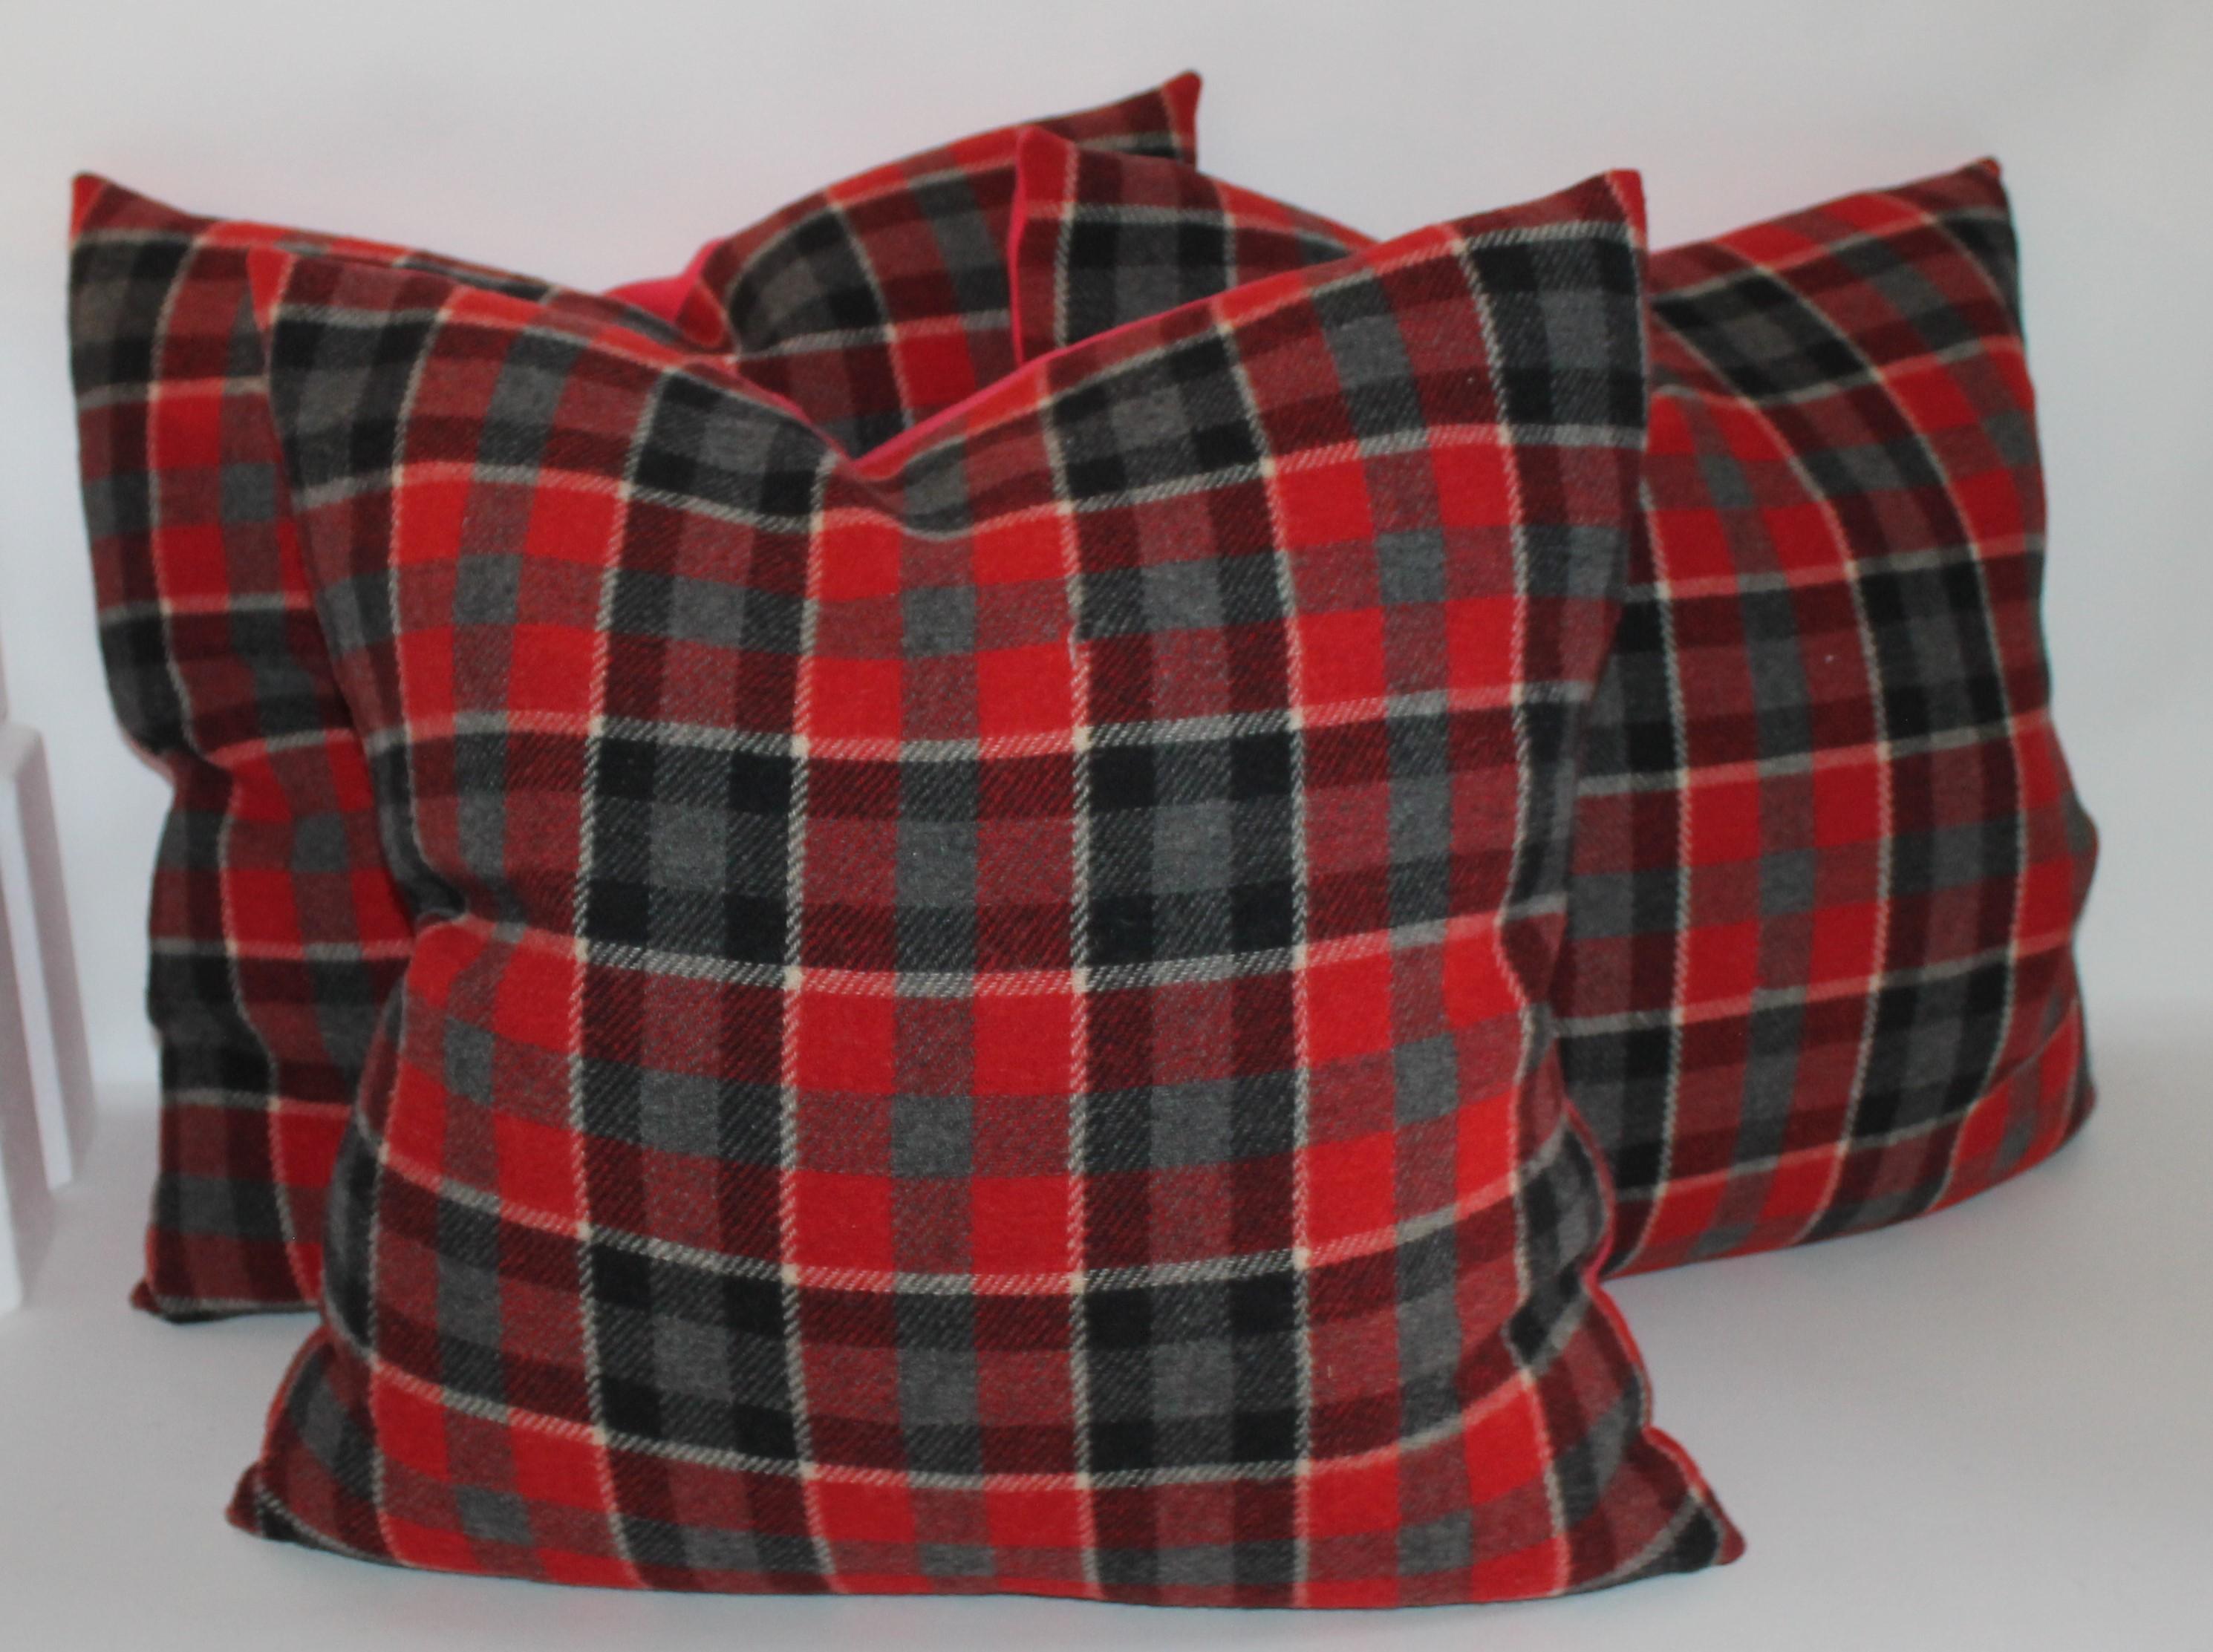 We have two different styles and colors of holiday plaids. There are burnt orange and black wool plaid pillows. There are two pairs of these in stock. All in pristine condition with black cotton linen backings.
The next colors are black and red and